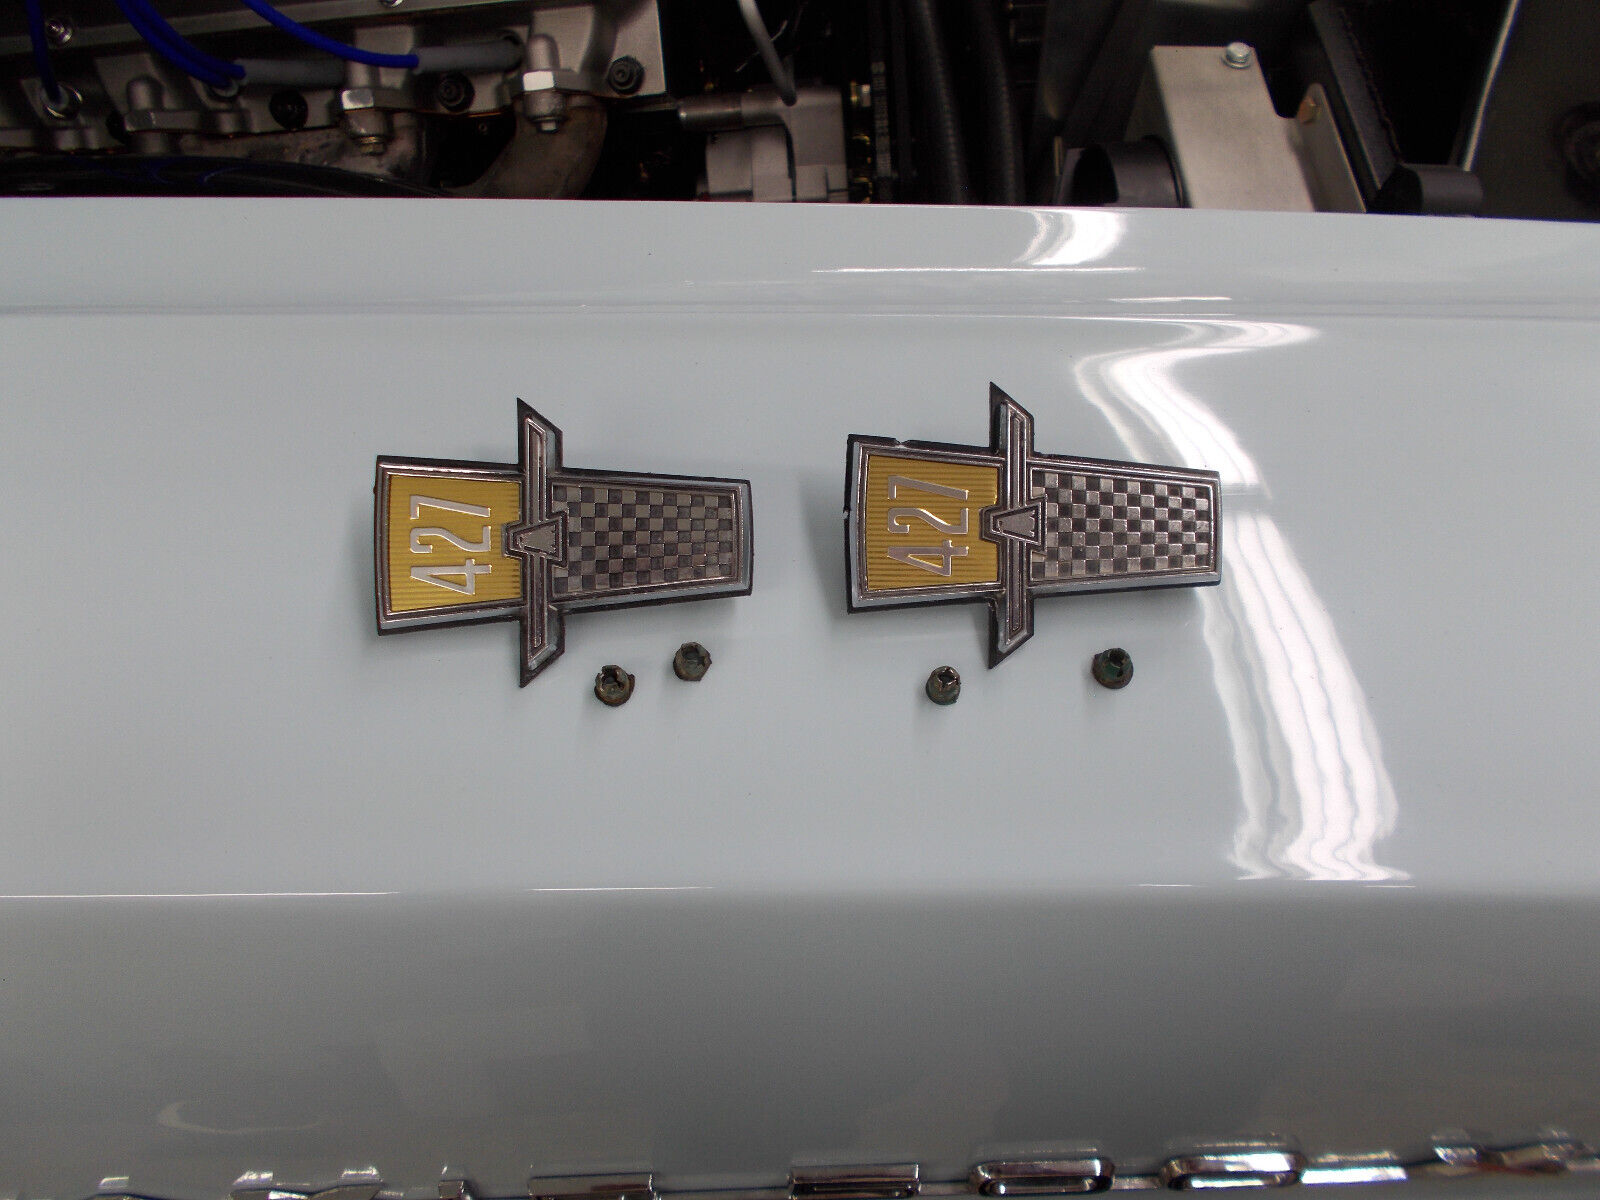 1965 FORD GALAXIE FENDER EMBLEM, A PAIR OF 427 BADGE Ornaments Used